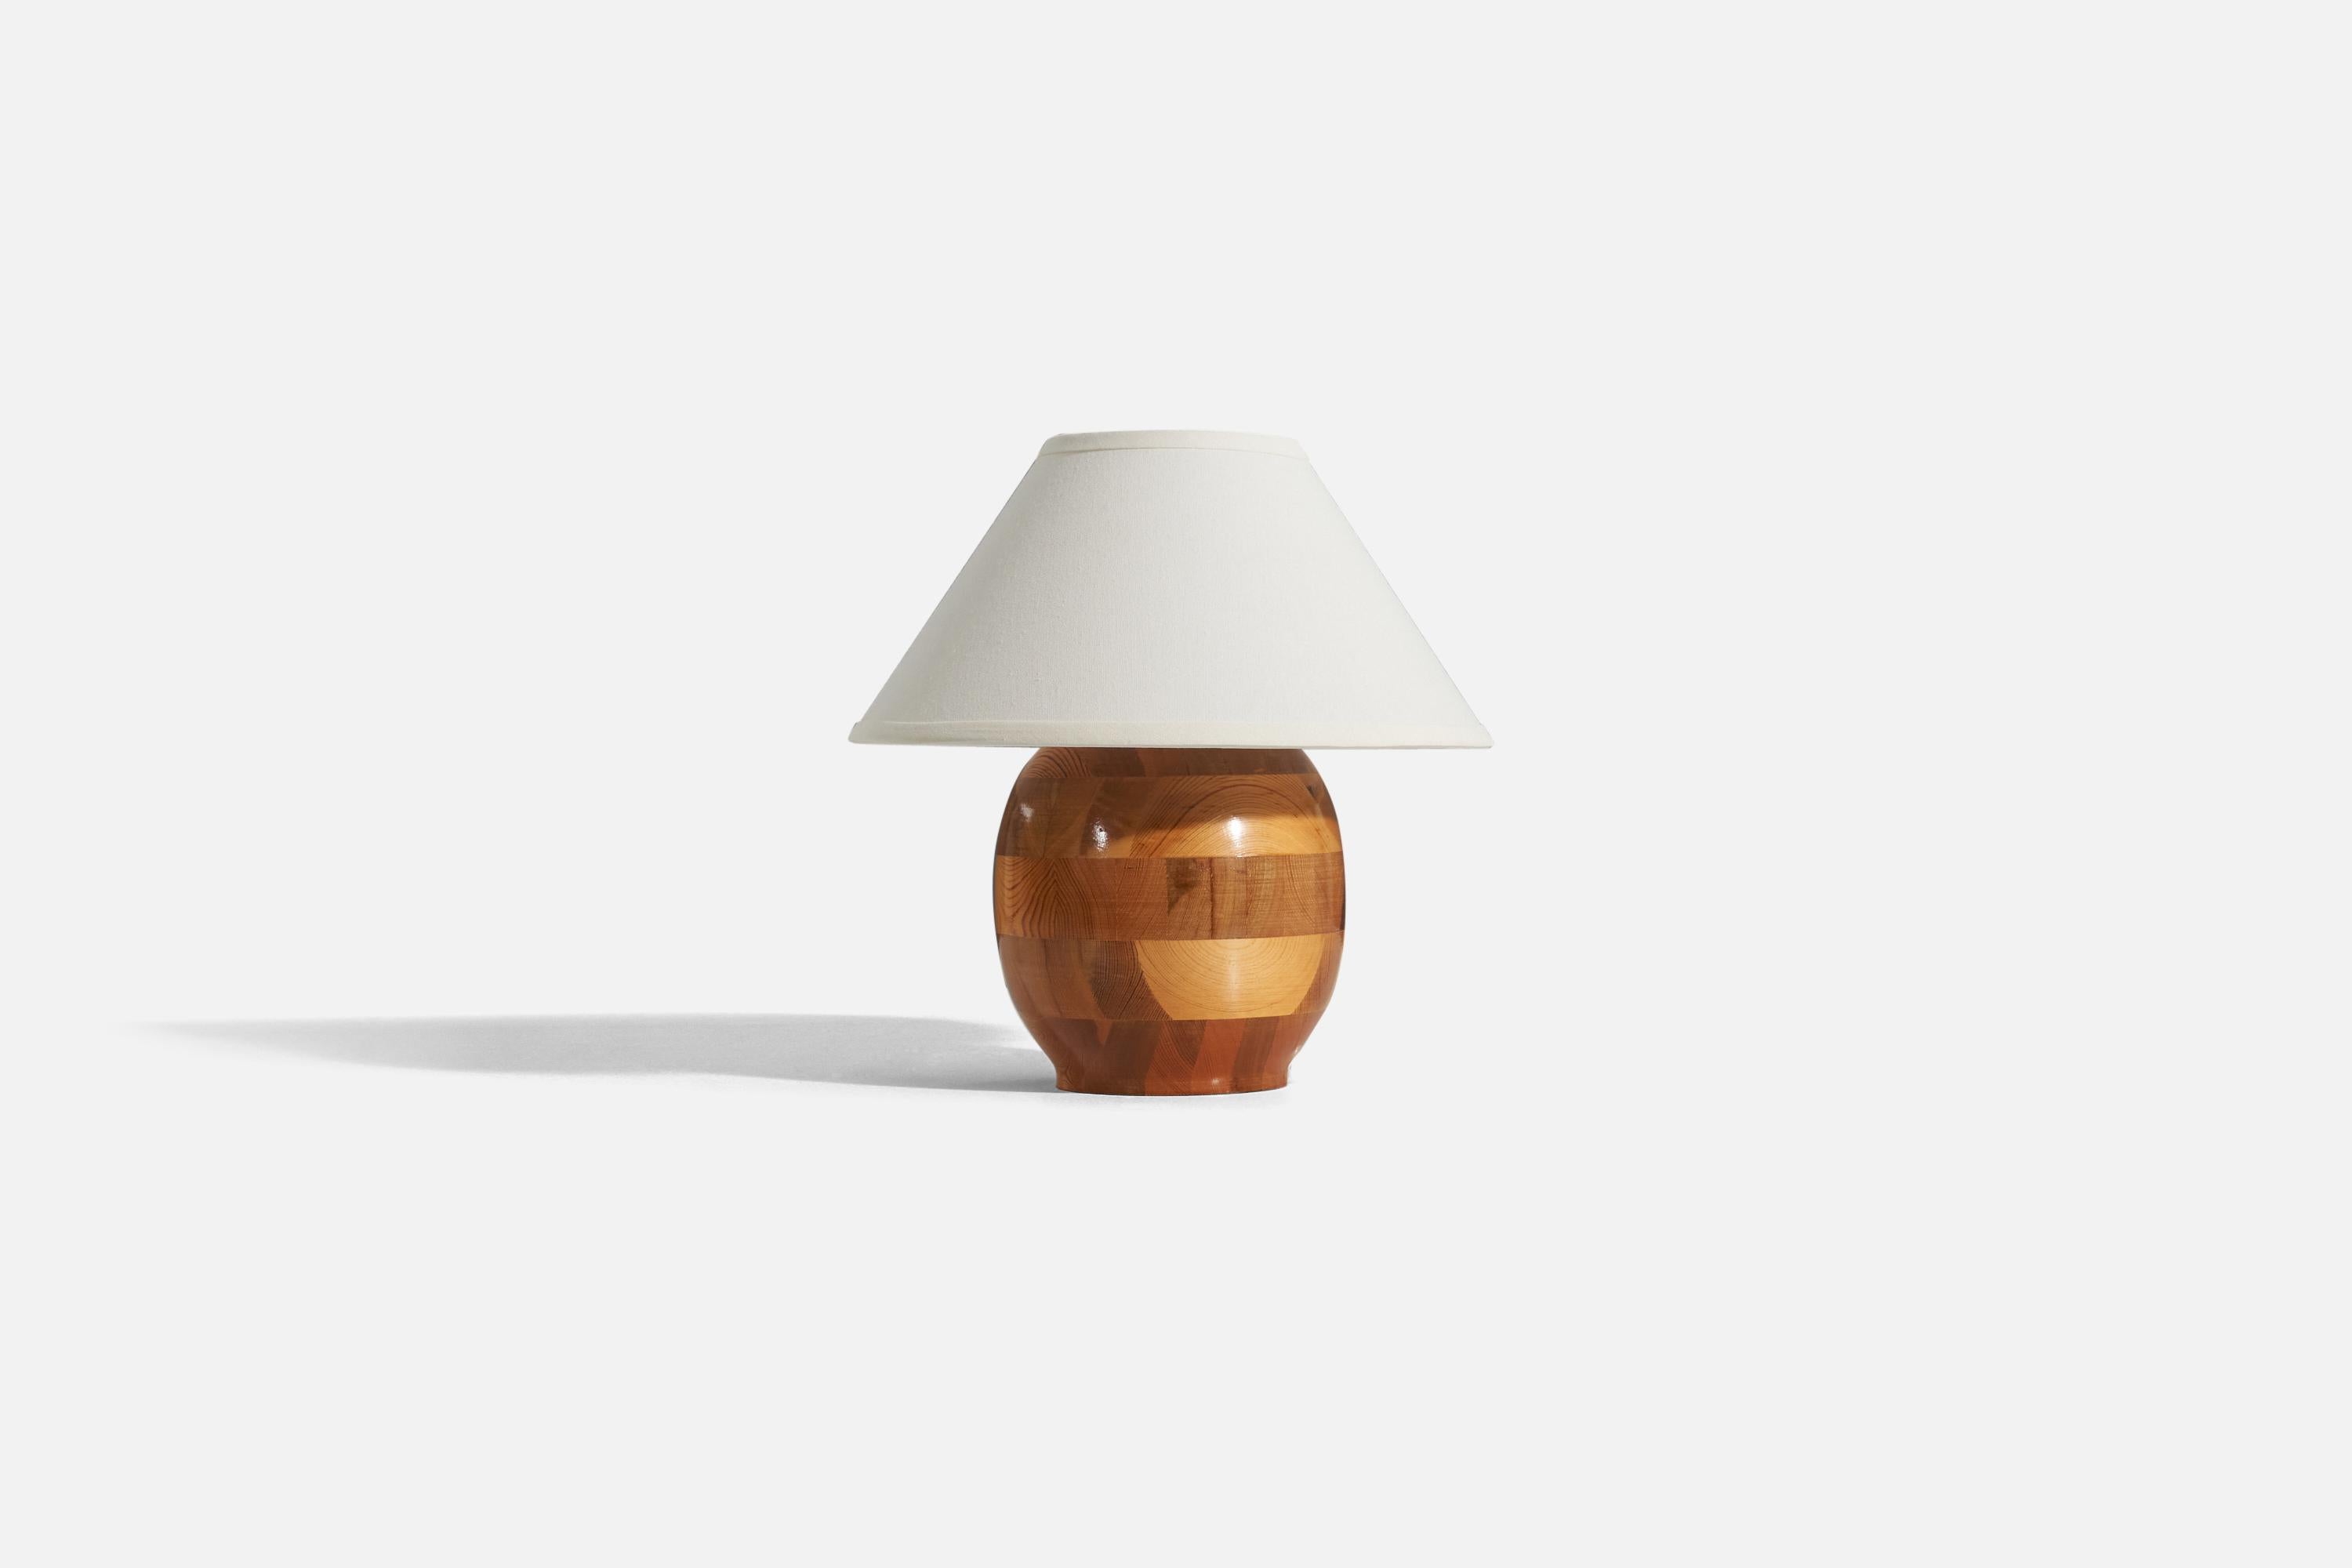 A pine table lamp designed and produced by a Swedish designer, Sweden, 1960s.

Sold without lampshade. 
Dimensions of lamp (inches) : 10.75 x 7.25 x 7.25 (H x W x D)
Dimensions of shade (inches) : 5.75 x 14 x 8 (T x B x H)
Dimension of lamp